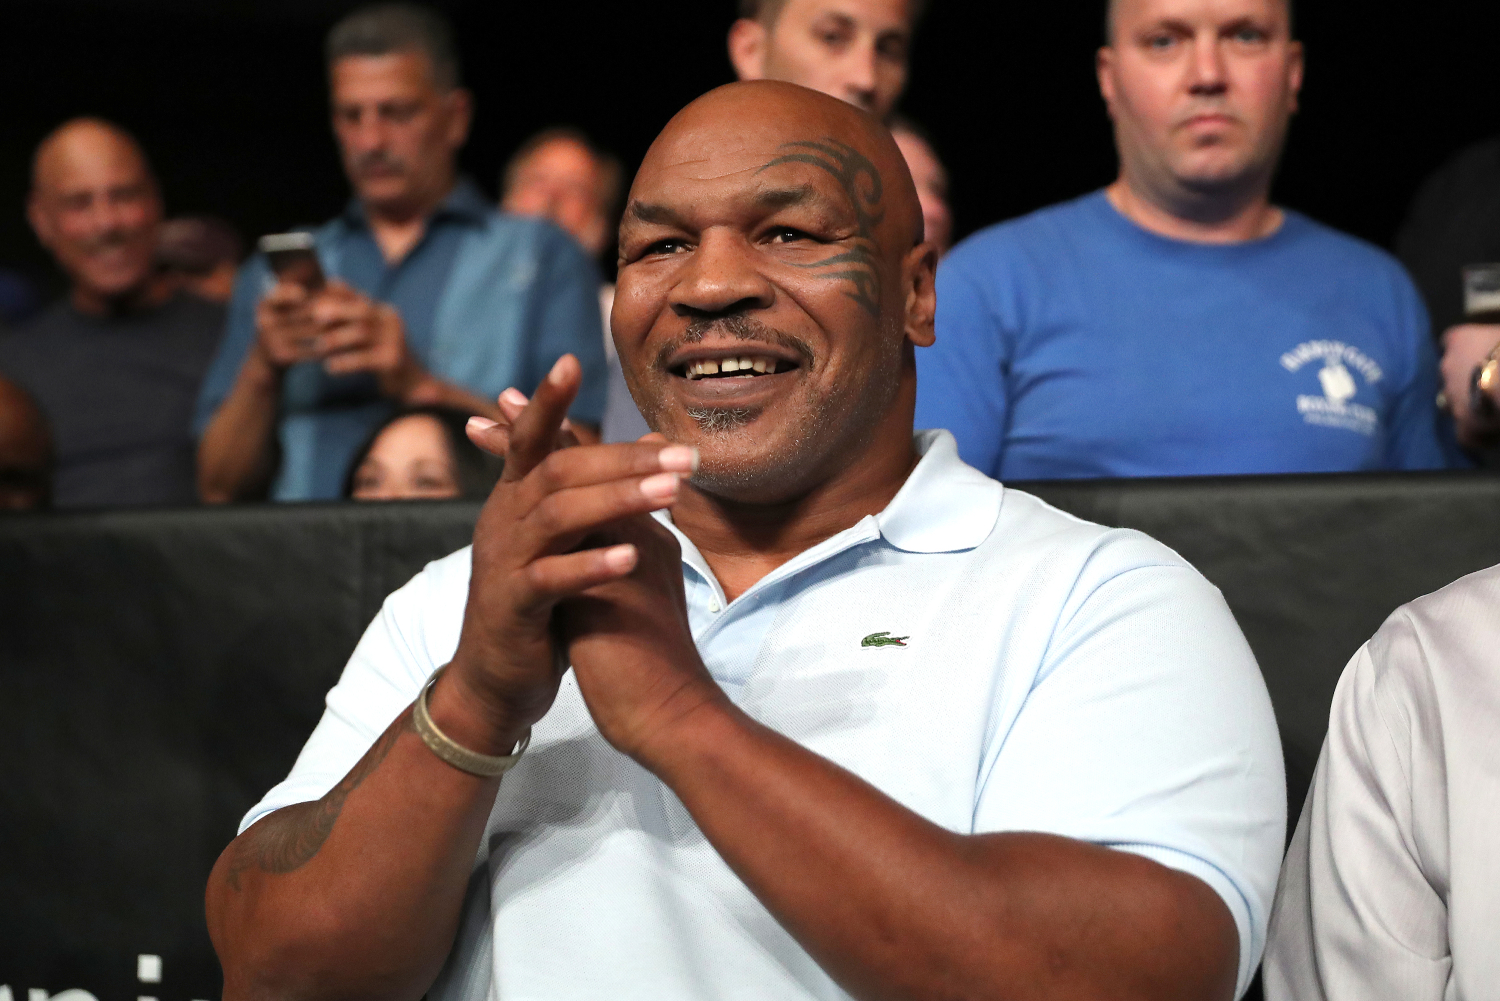 Former heavyweight boxing champion Mike Tyson reveals one of his biggest post-boxing fears during his podcast.